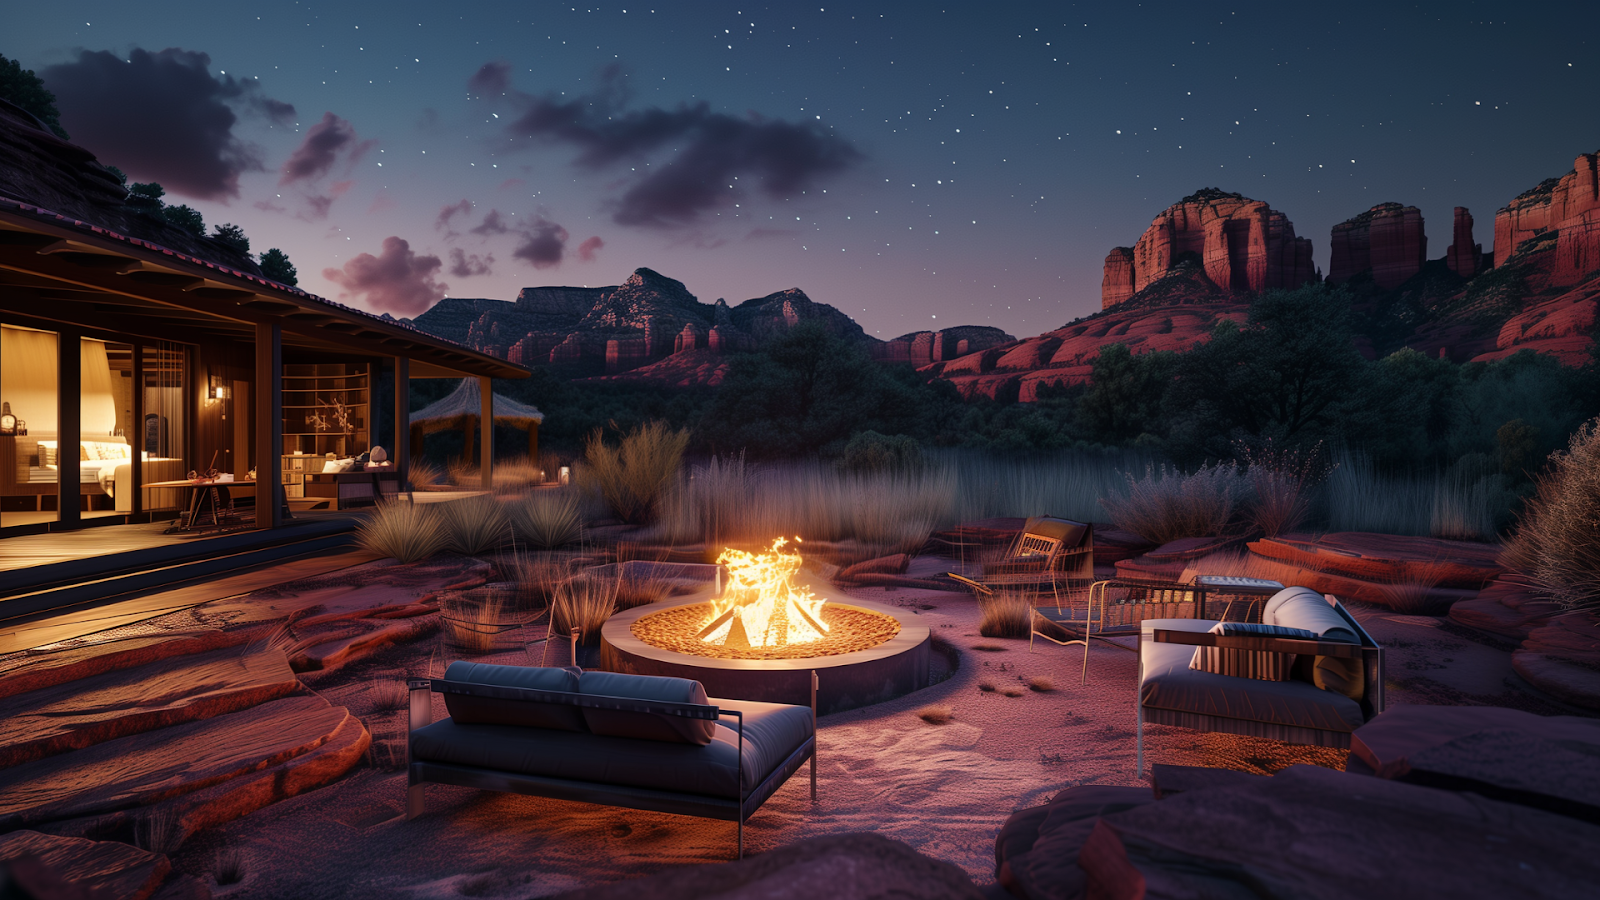 Cozy fire pit outside a luxury cabin in Sedona with red rock formations and a starry sky.